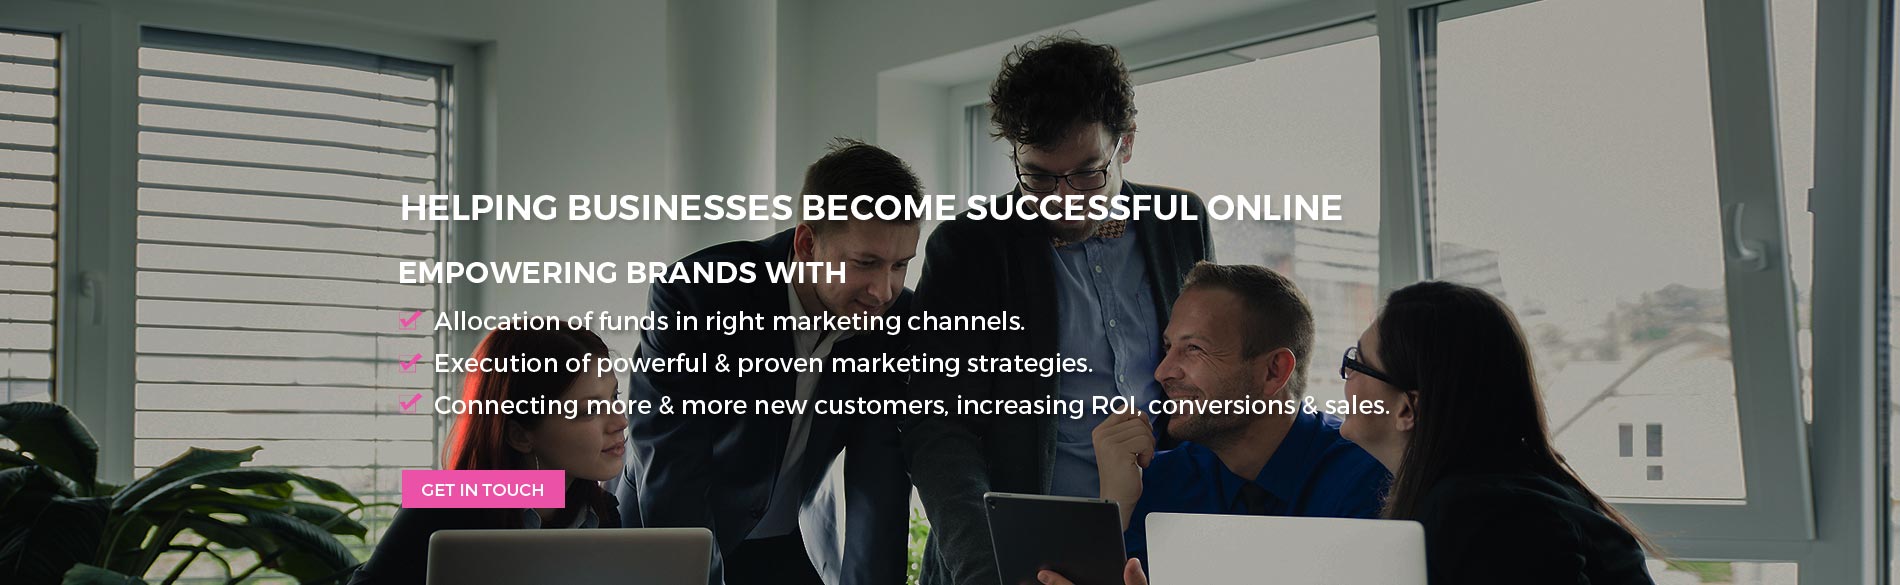 Helping Business Become successful online